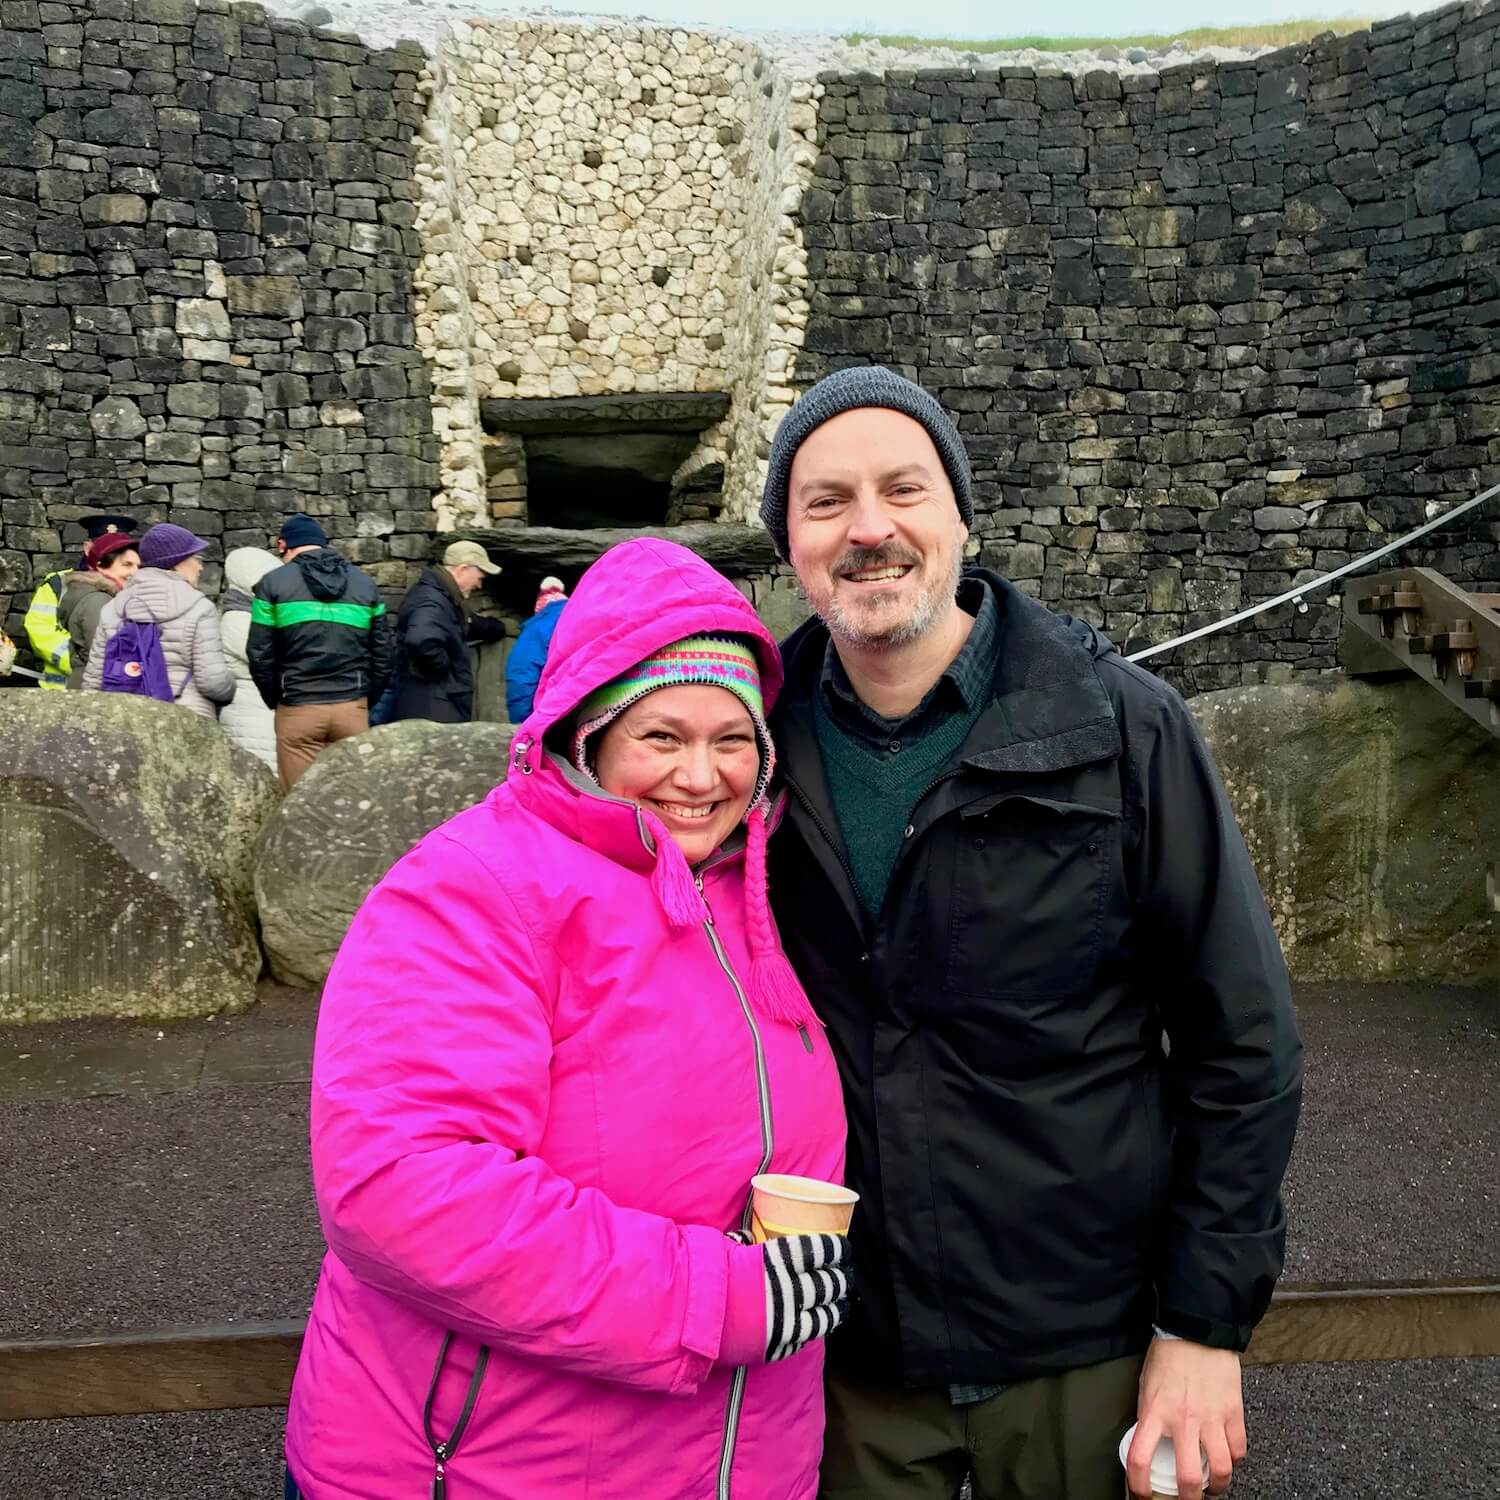 My new friend Inka and I standing in the entrance of ancient Newgrange Ireland winter solstice site.